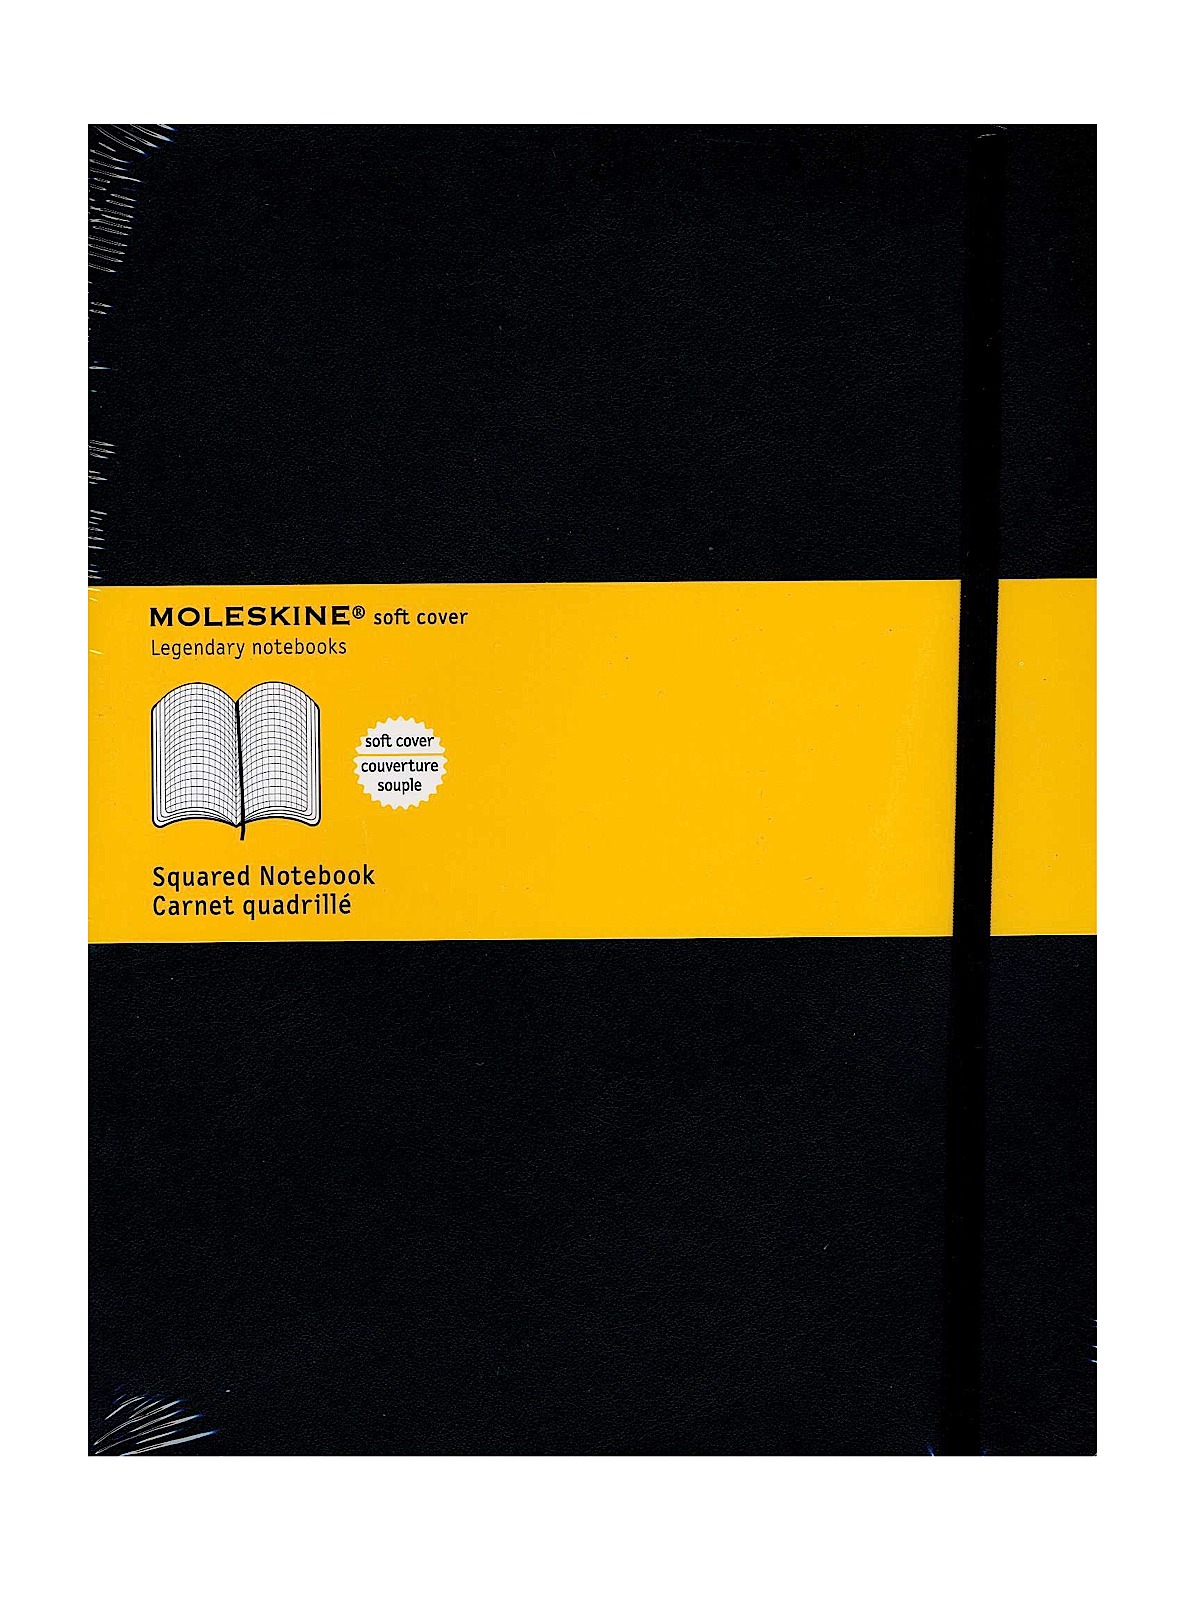 Classic Soft Cover Notebooks Black 7 1 2 In. X 10 In. 192 Pages, Squared